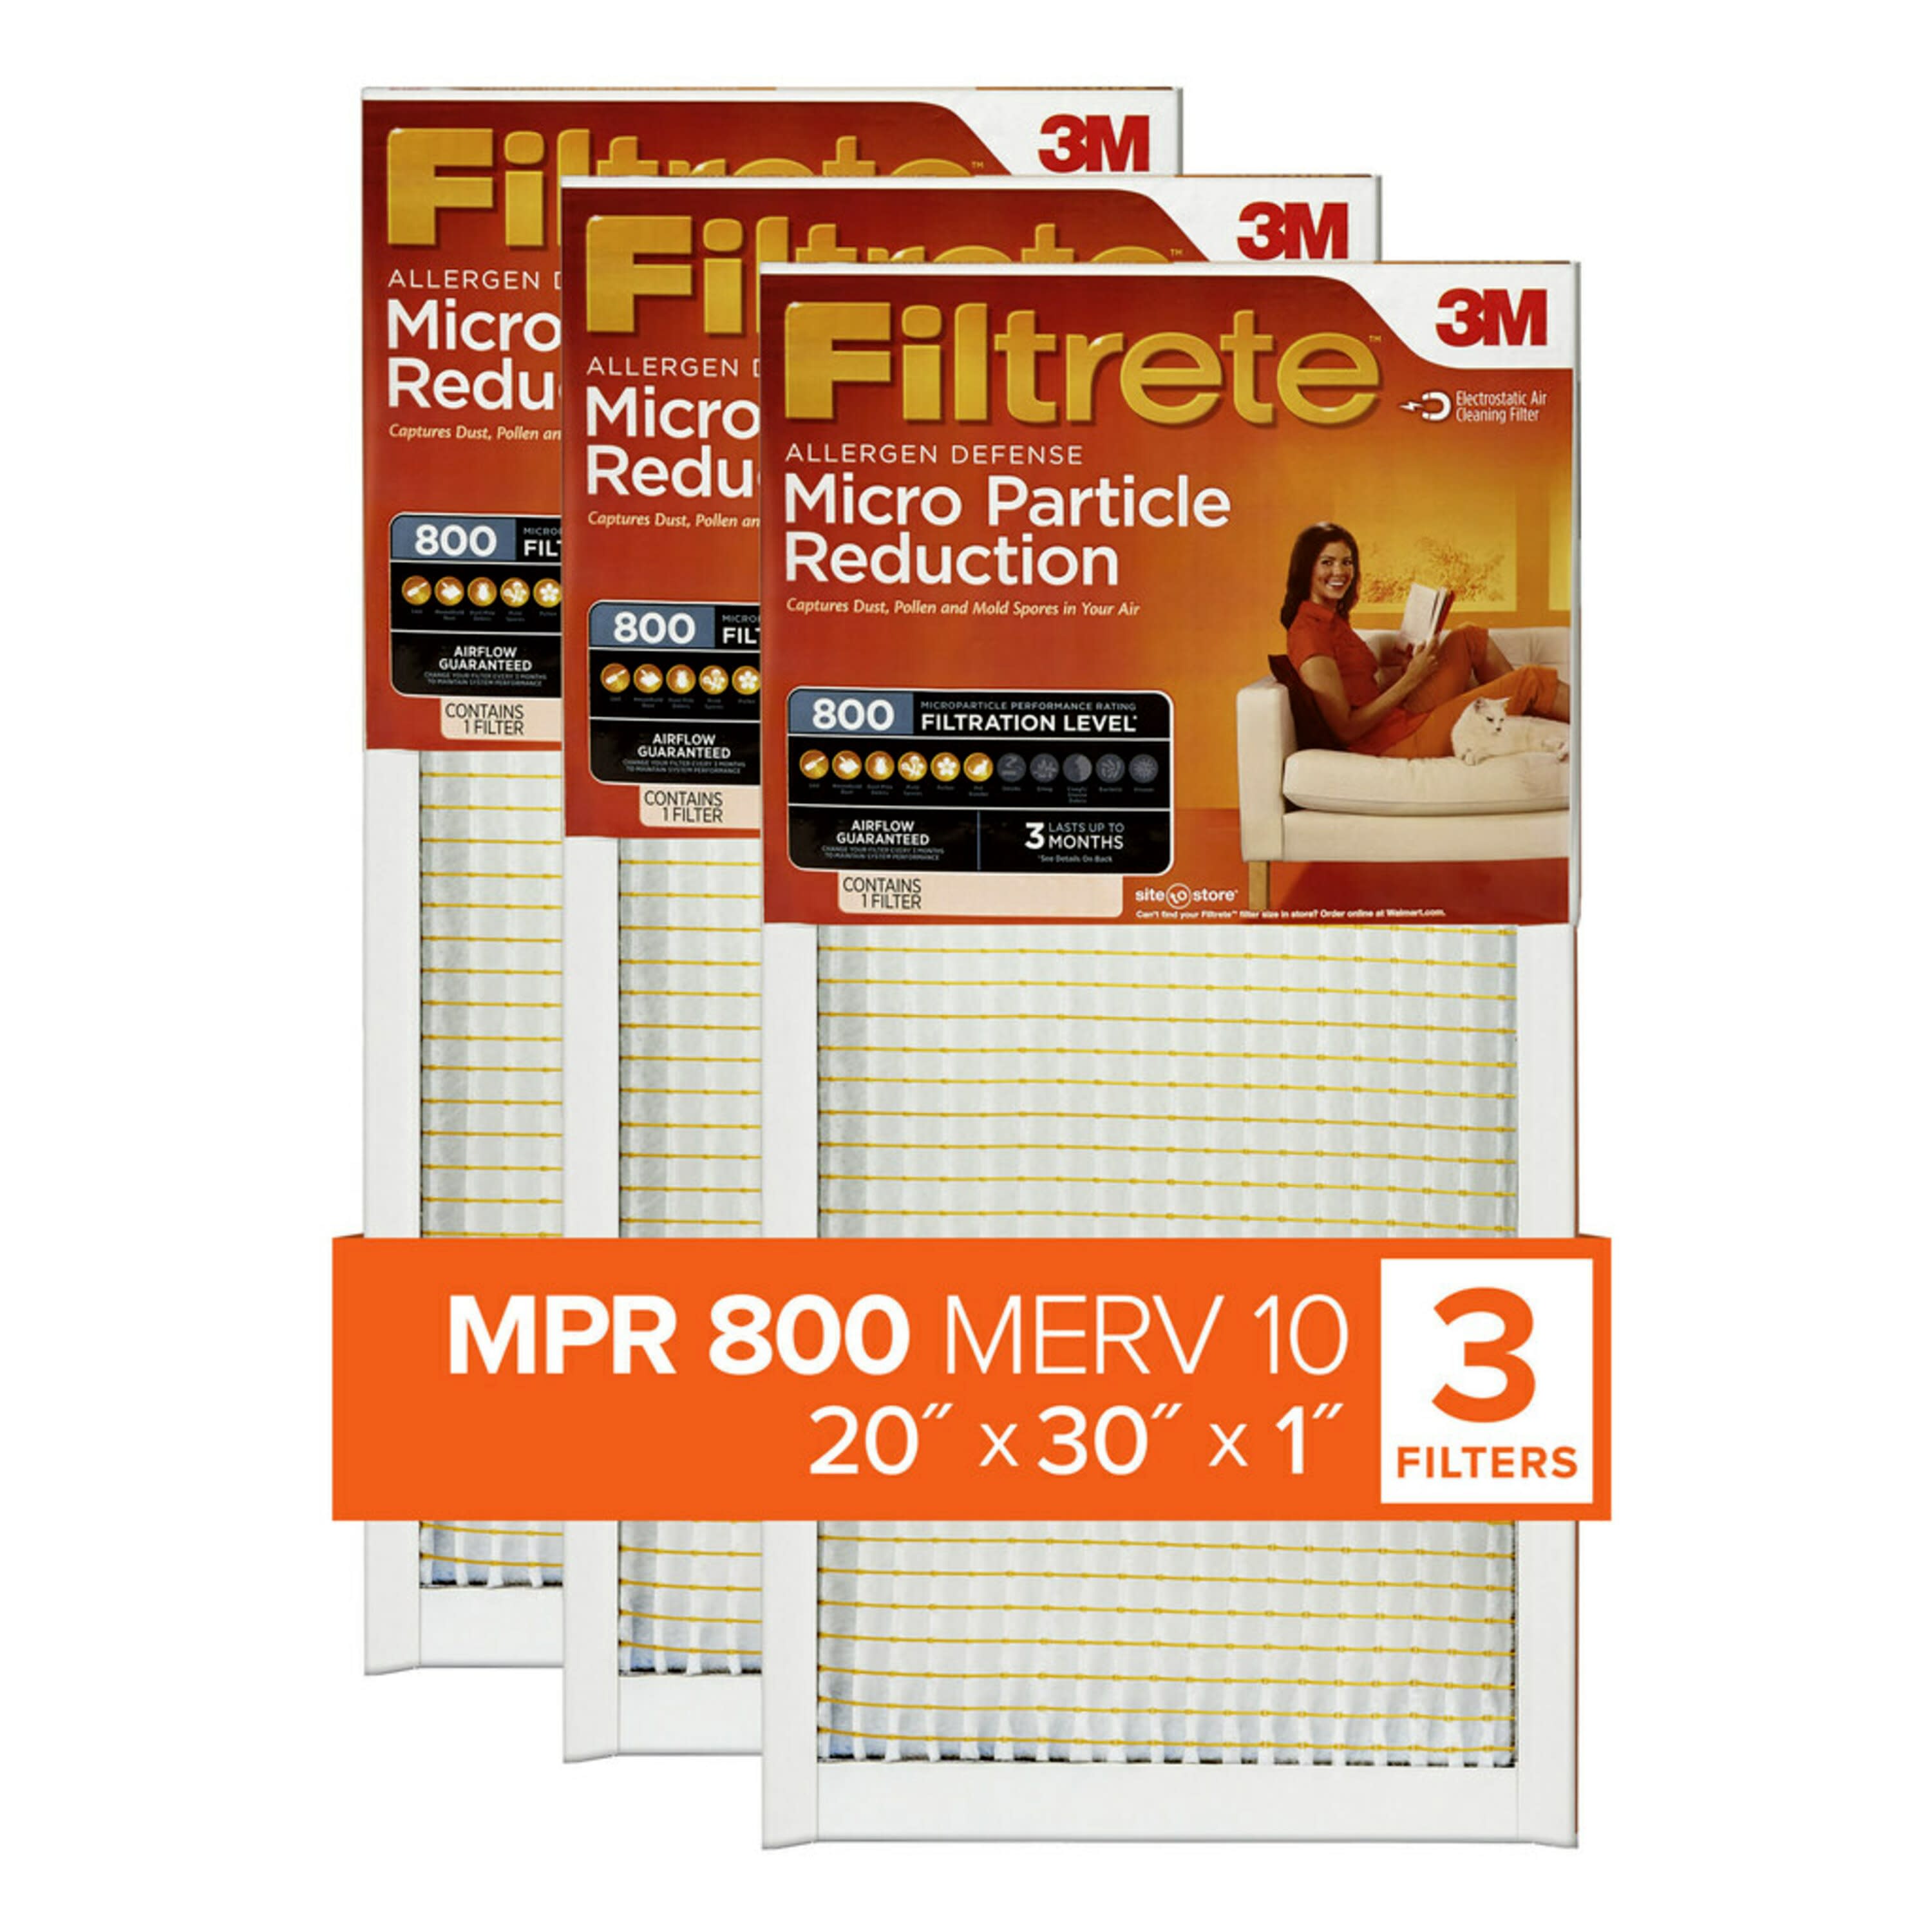 Filtrete by 3M 20x30x1, MERV 10, Micro Particle Reduction HVAC Furnace Air Filter, 800 MPR, 3 Filters - image 1 of 18